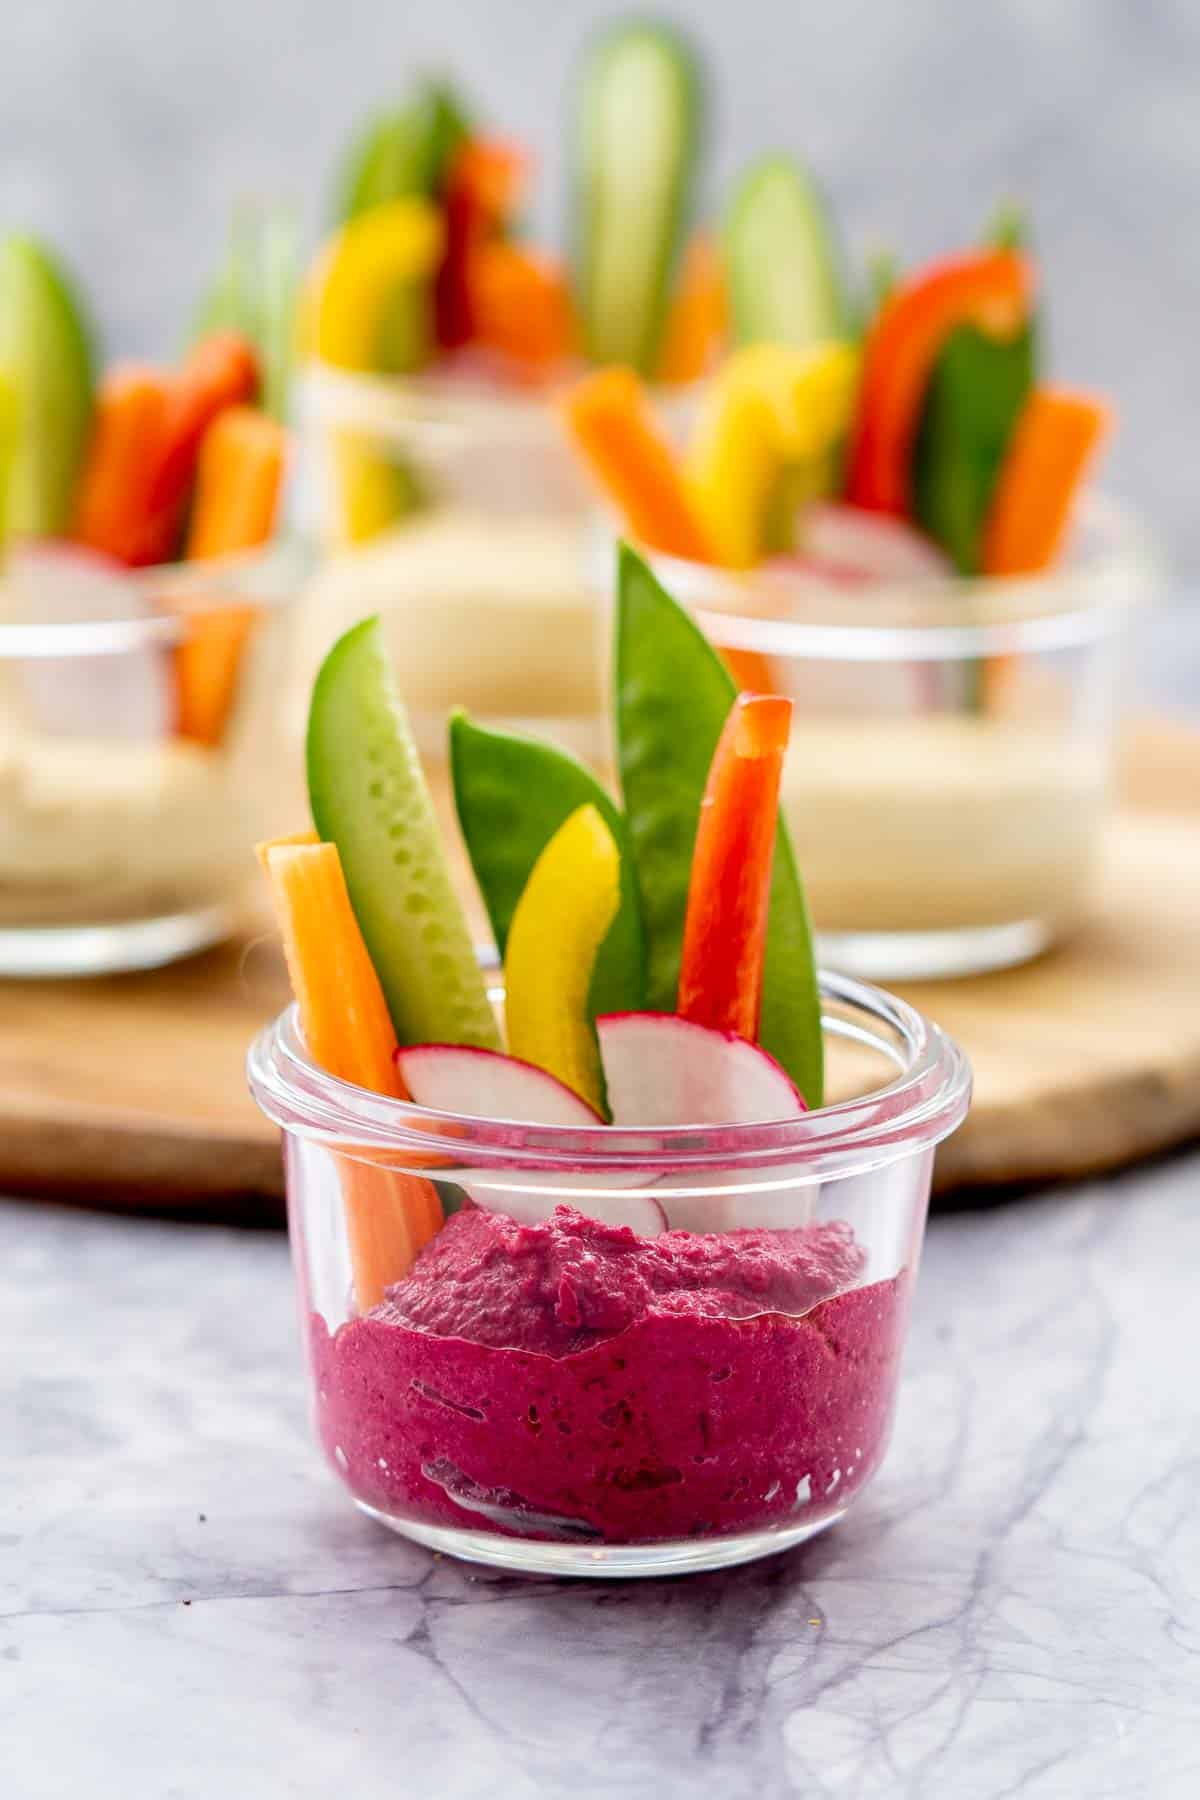 Glass ramekins half filled with beetroot hummus and sliced pieces of radishes, carrots, sugar snap peas and cucumber sitting on the bench